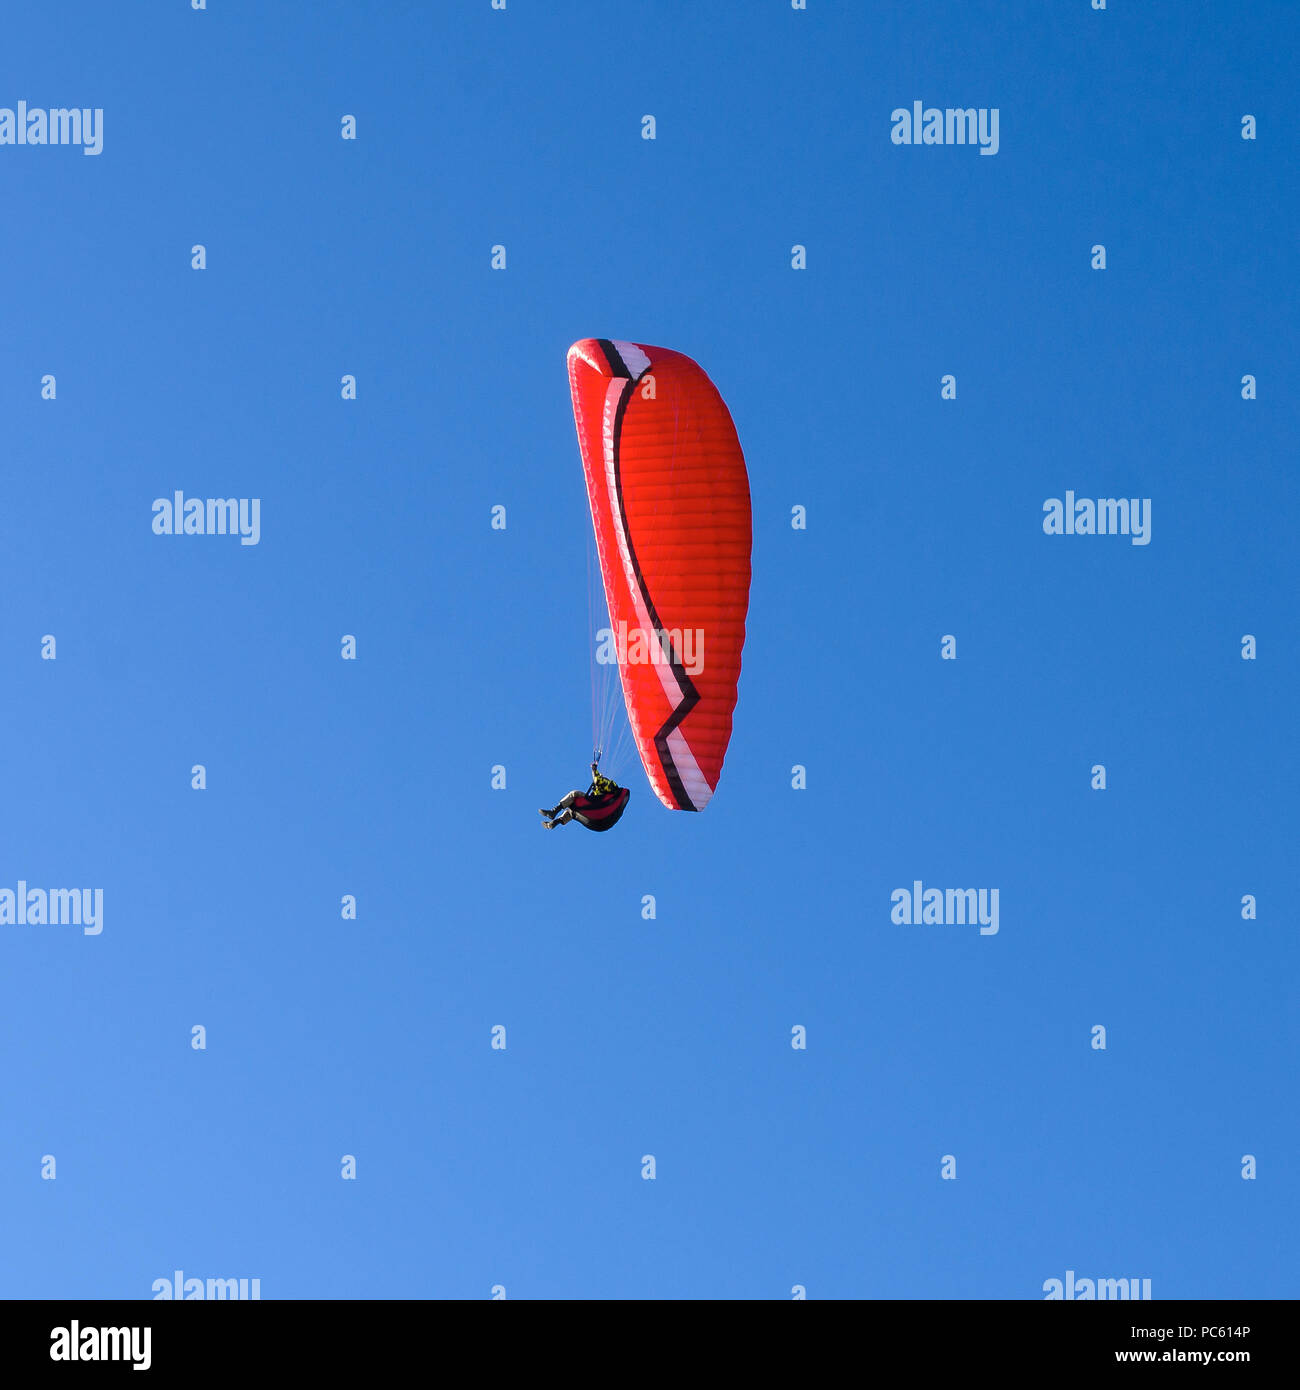 Paraglider against the sky. Stock Photo